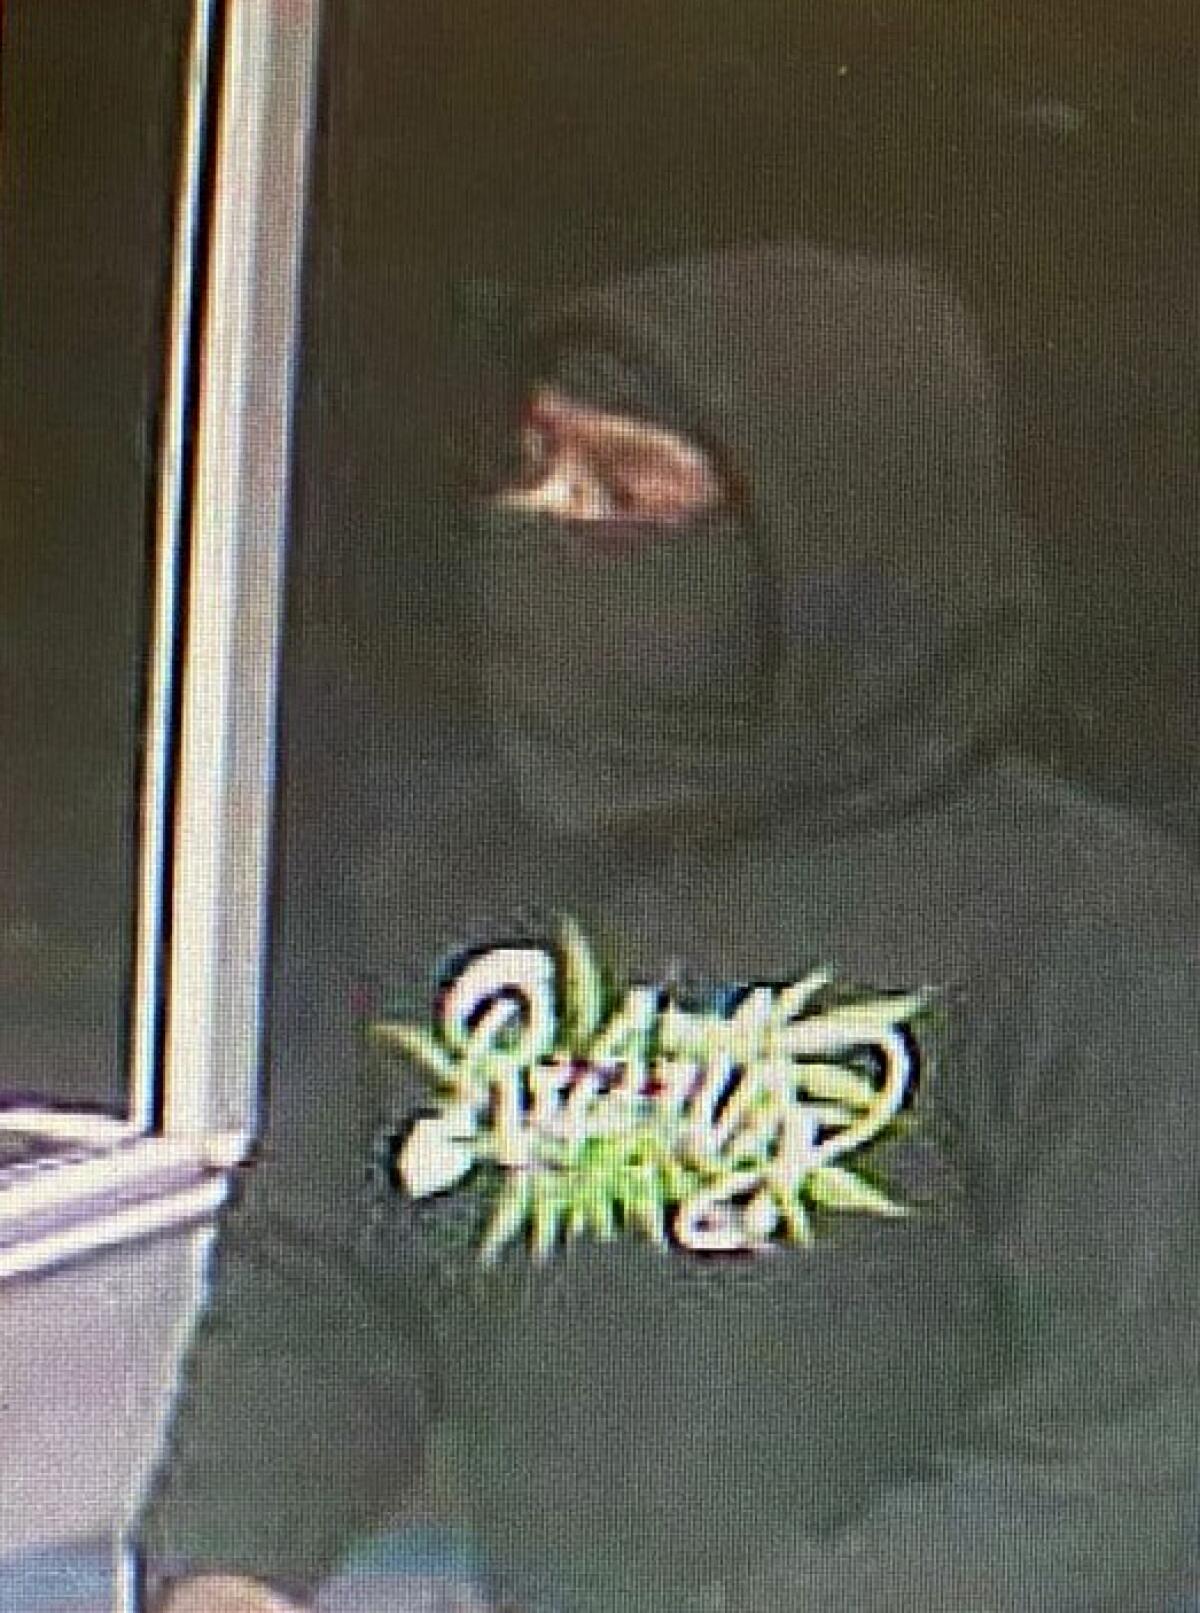 In this photo released by the Ontario Police Department is a person police are seeking in connection with a robbery at a 7-Eleven store in Ontario, Calif., on Monday, July 11, 2022. (Ontario Police Department via AP)